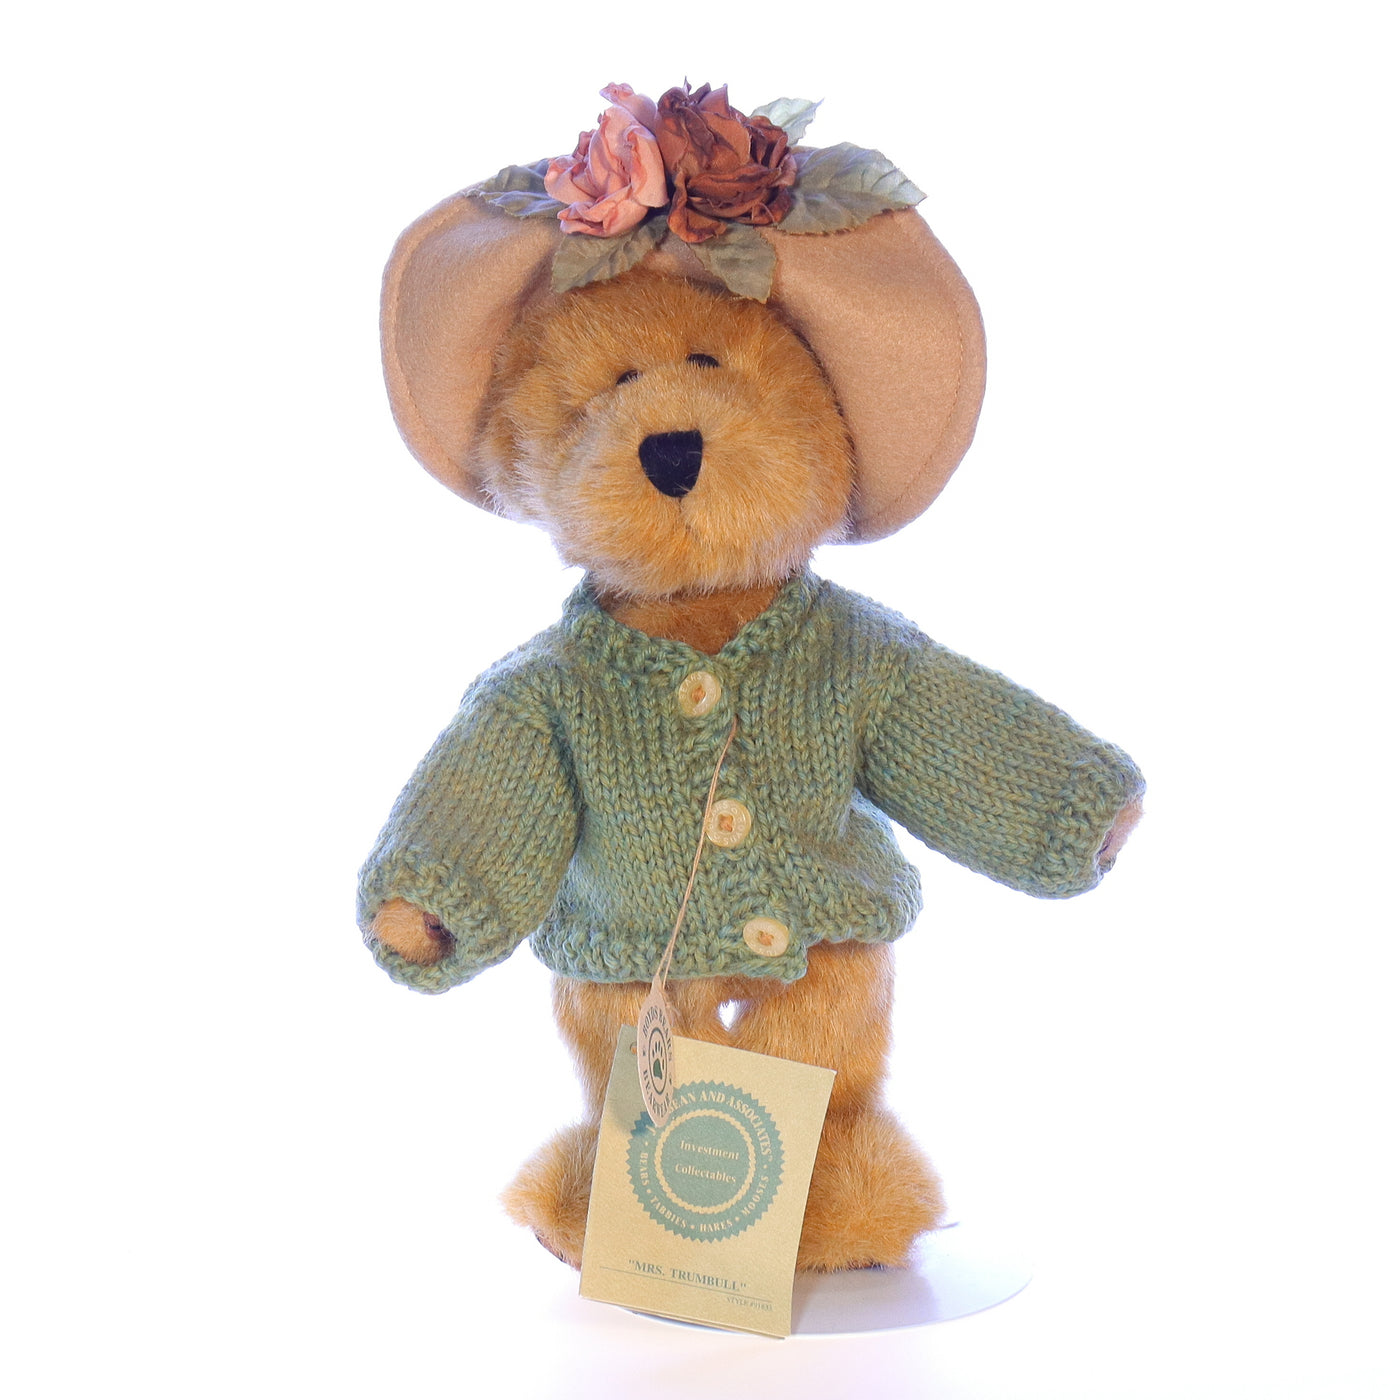 Boyds_Bears_and_Friends_91833_Mrs_Trumbull_Fashion_Stuffed_Animal_1985 Front View